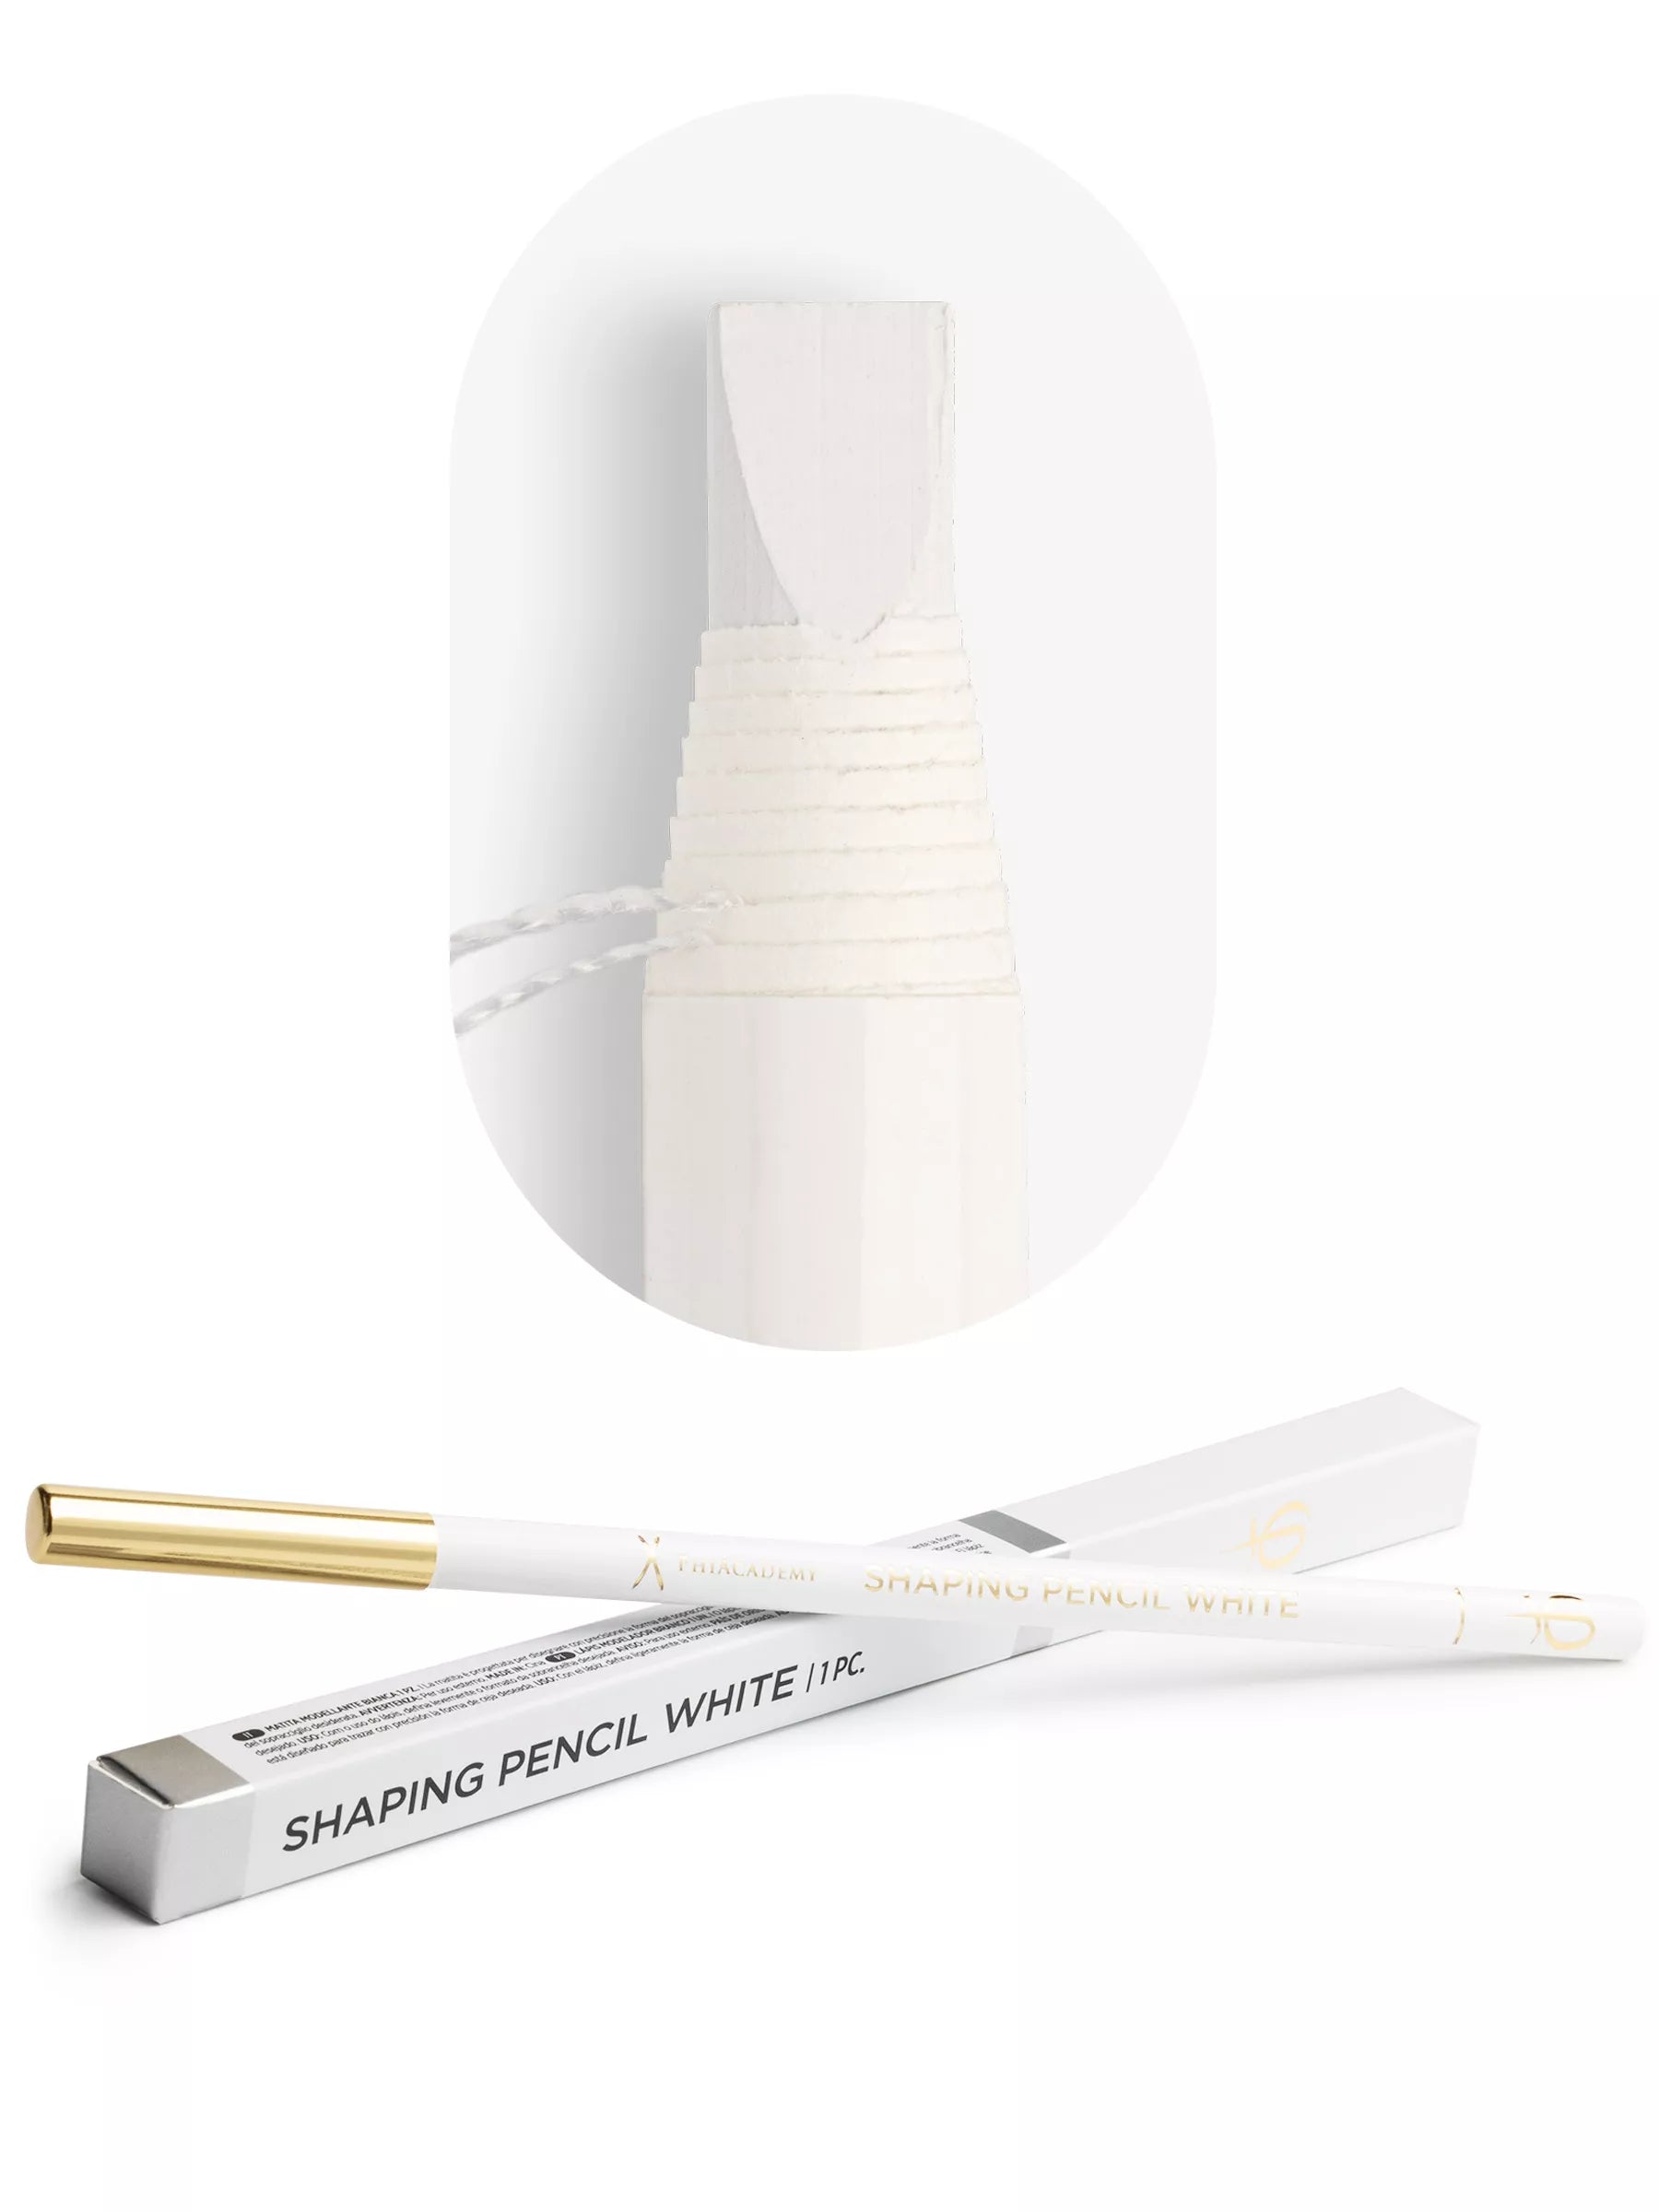 NEW SHAPING PENCIL